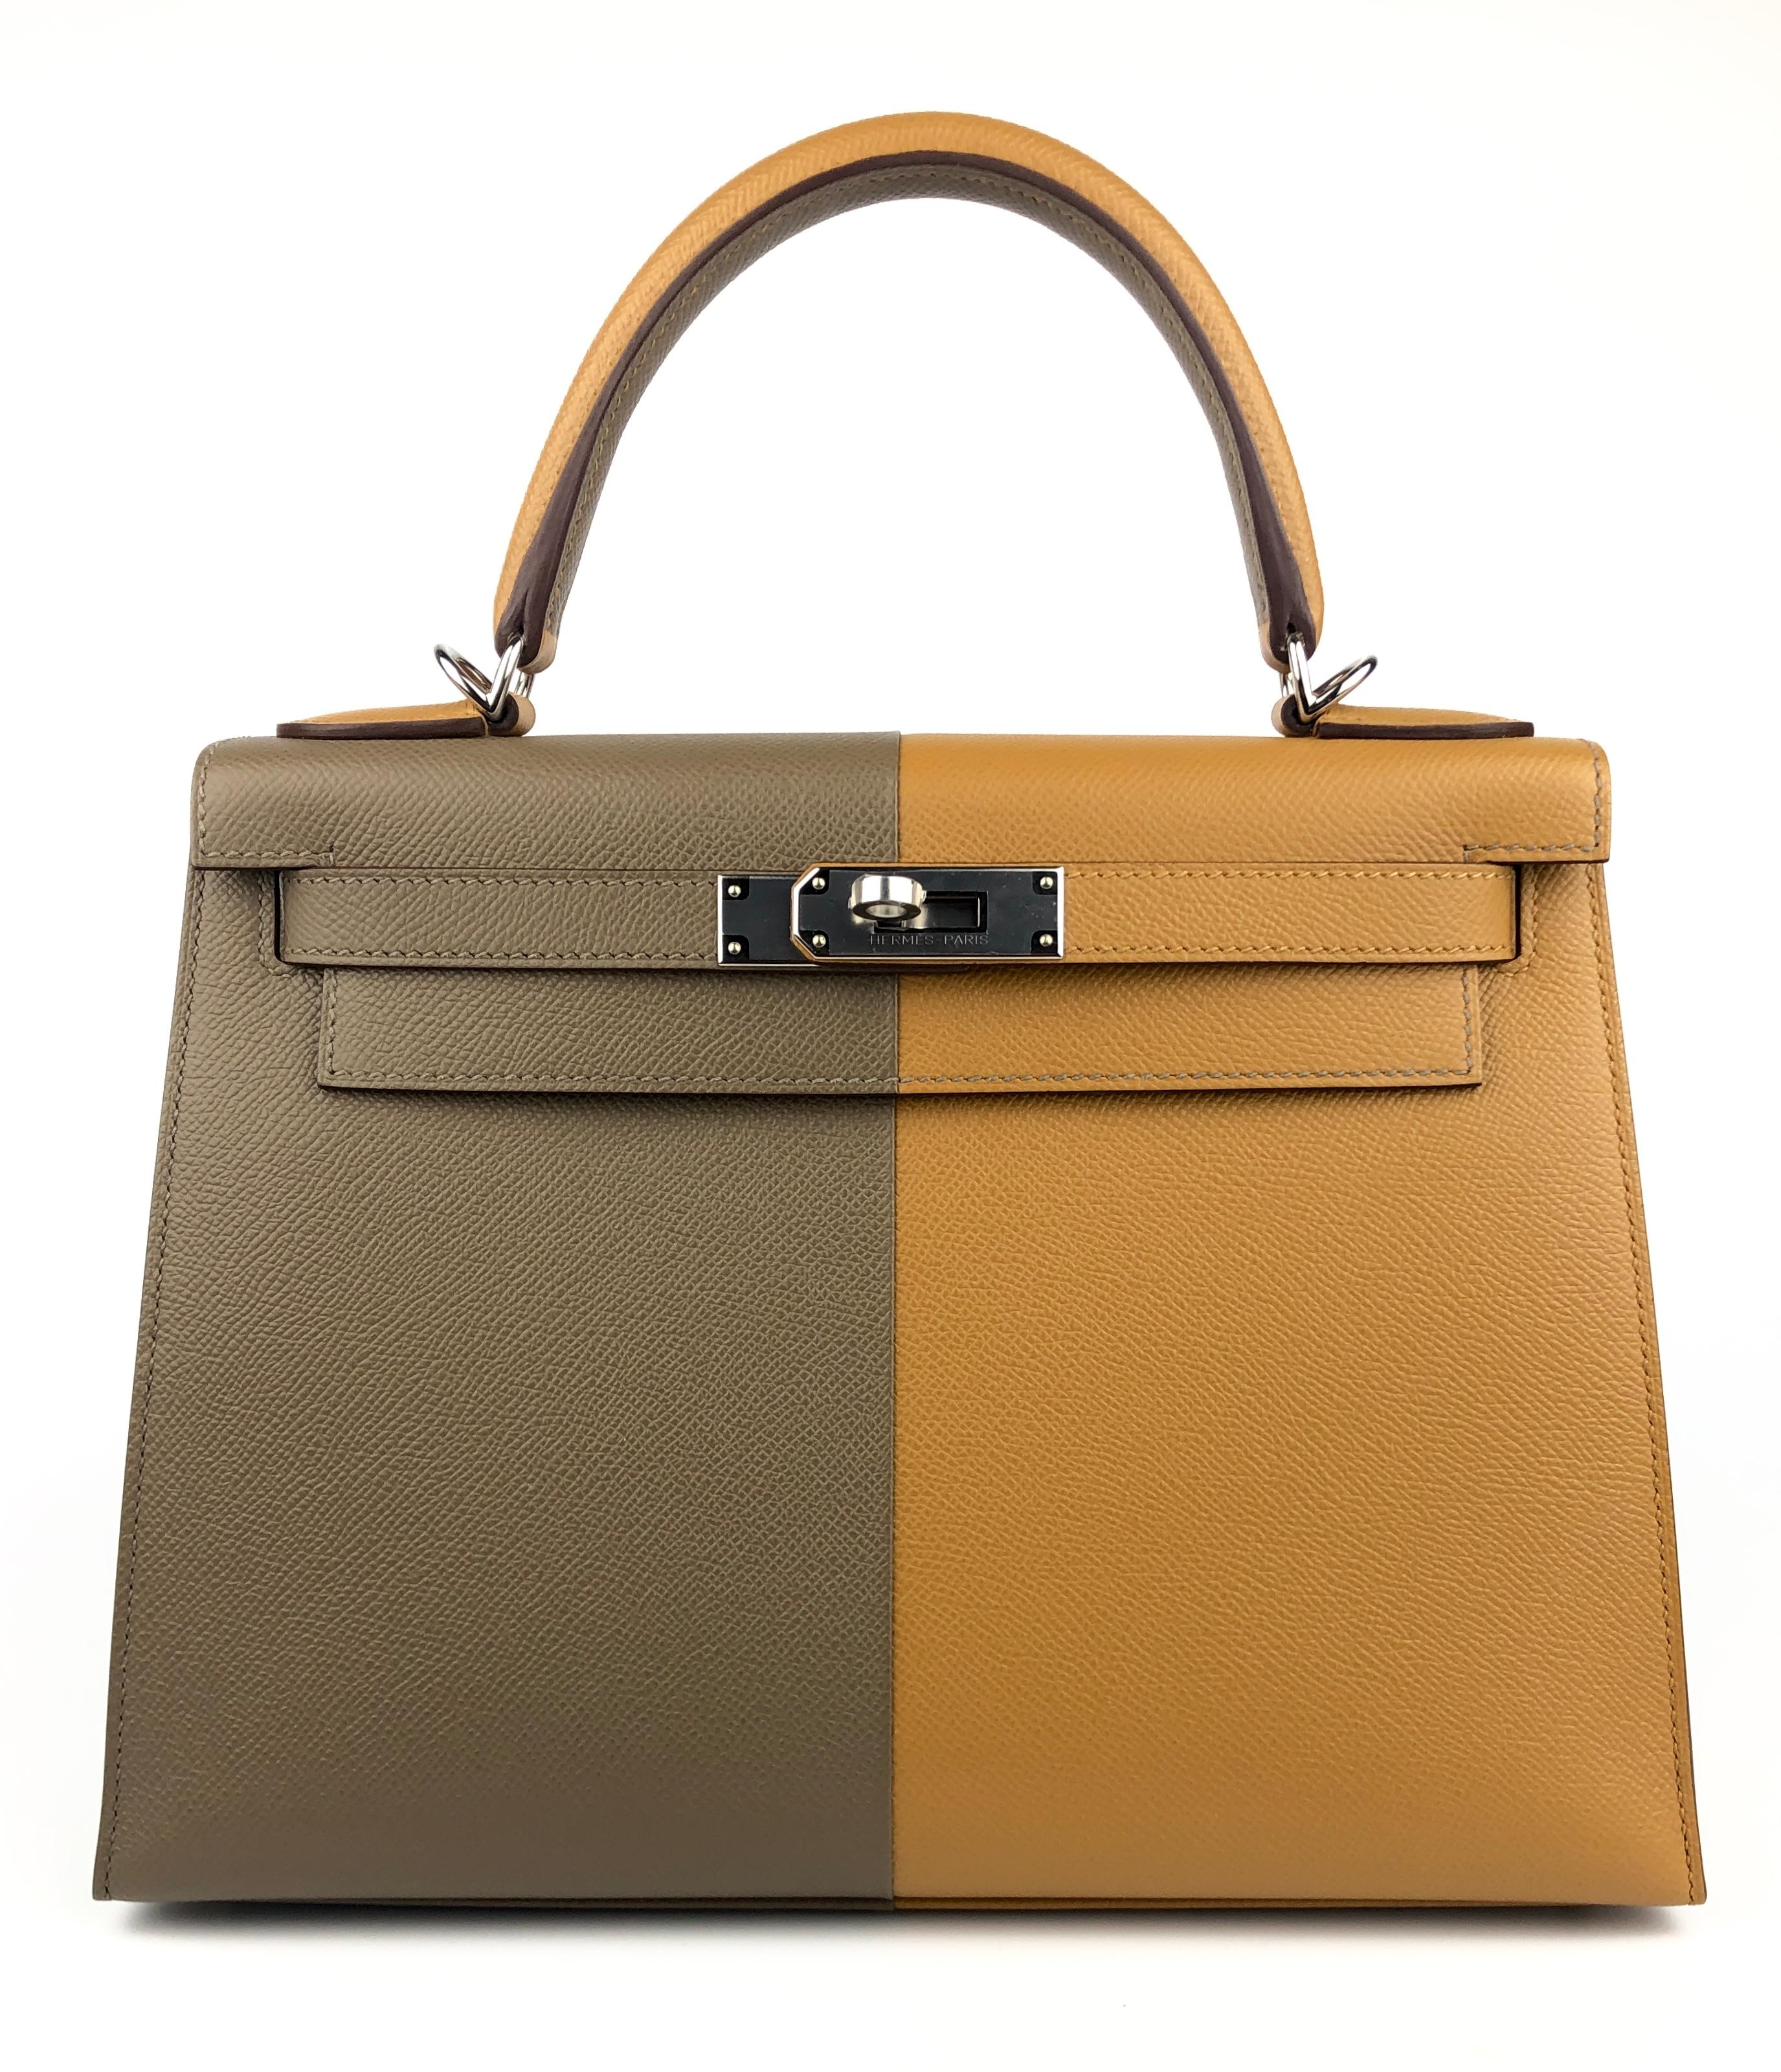 Ultra Rare & Absolutely Stunning As New Hermes Kelly 28 Sellier Casaque Tri-Color Etoupe, Sesame and Blue Indigo Epsom Leather complimented by Palladium Hardware. 2021 Z Stamp.

Shop with Confidence from Lux Addicts. Authenticity Guaranteed! 